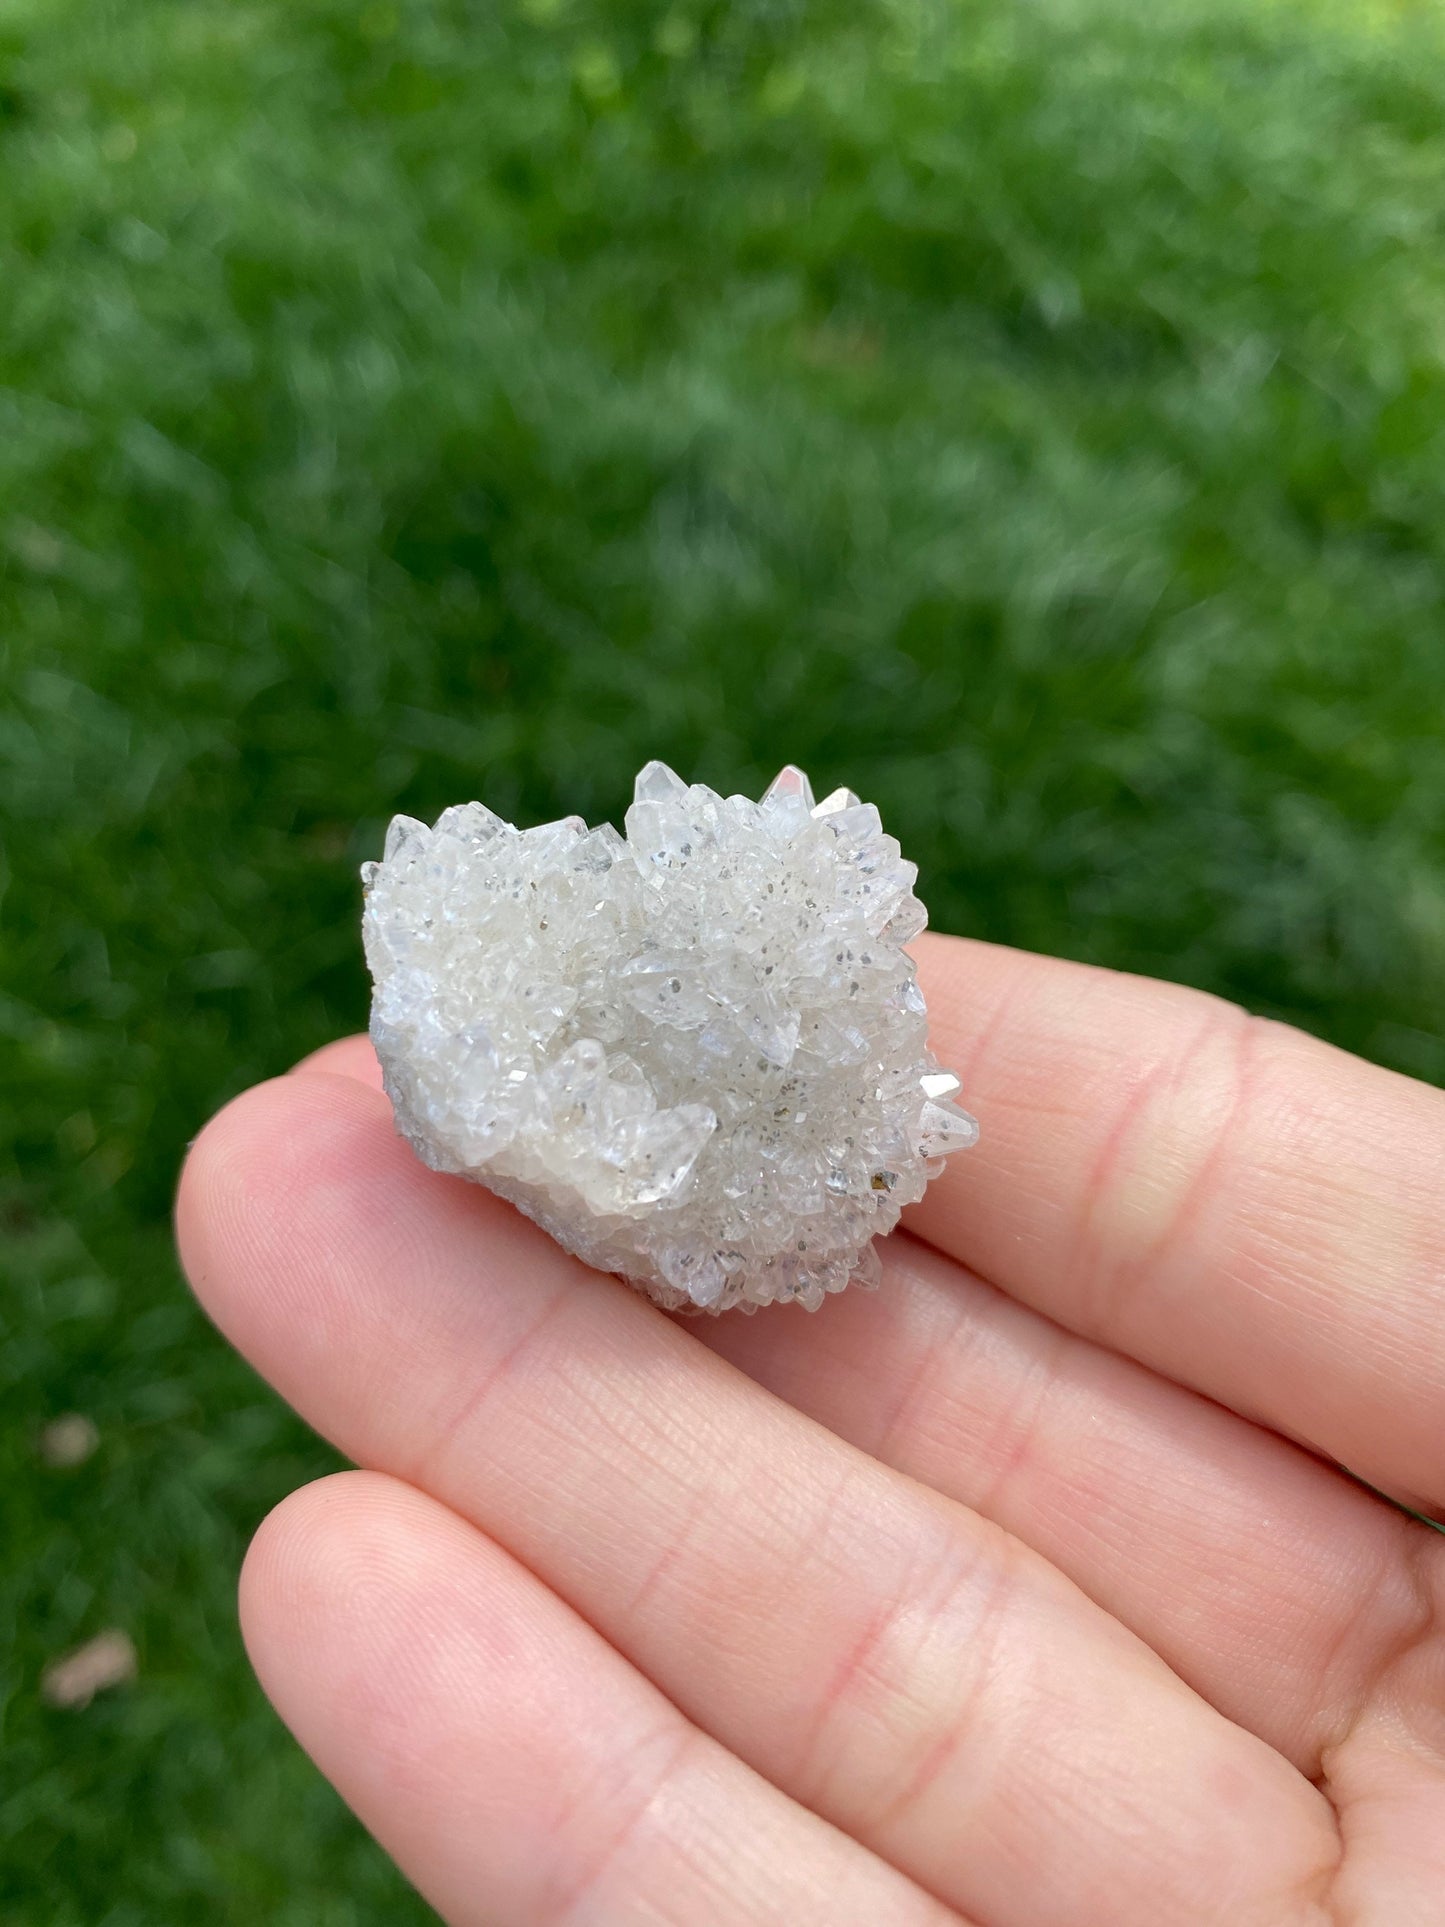 Clear Calcite Crystal Specimen with Marcasite - Buffalo Iowa - Linwood Mine